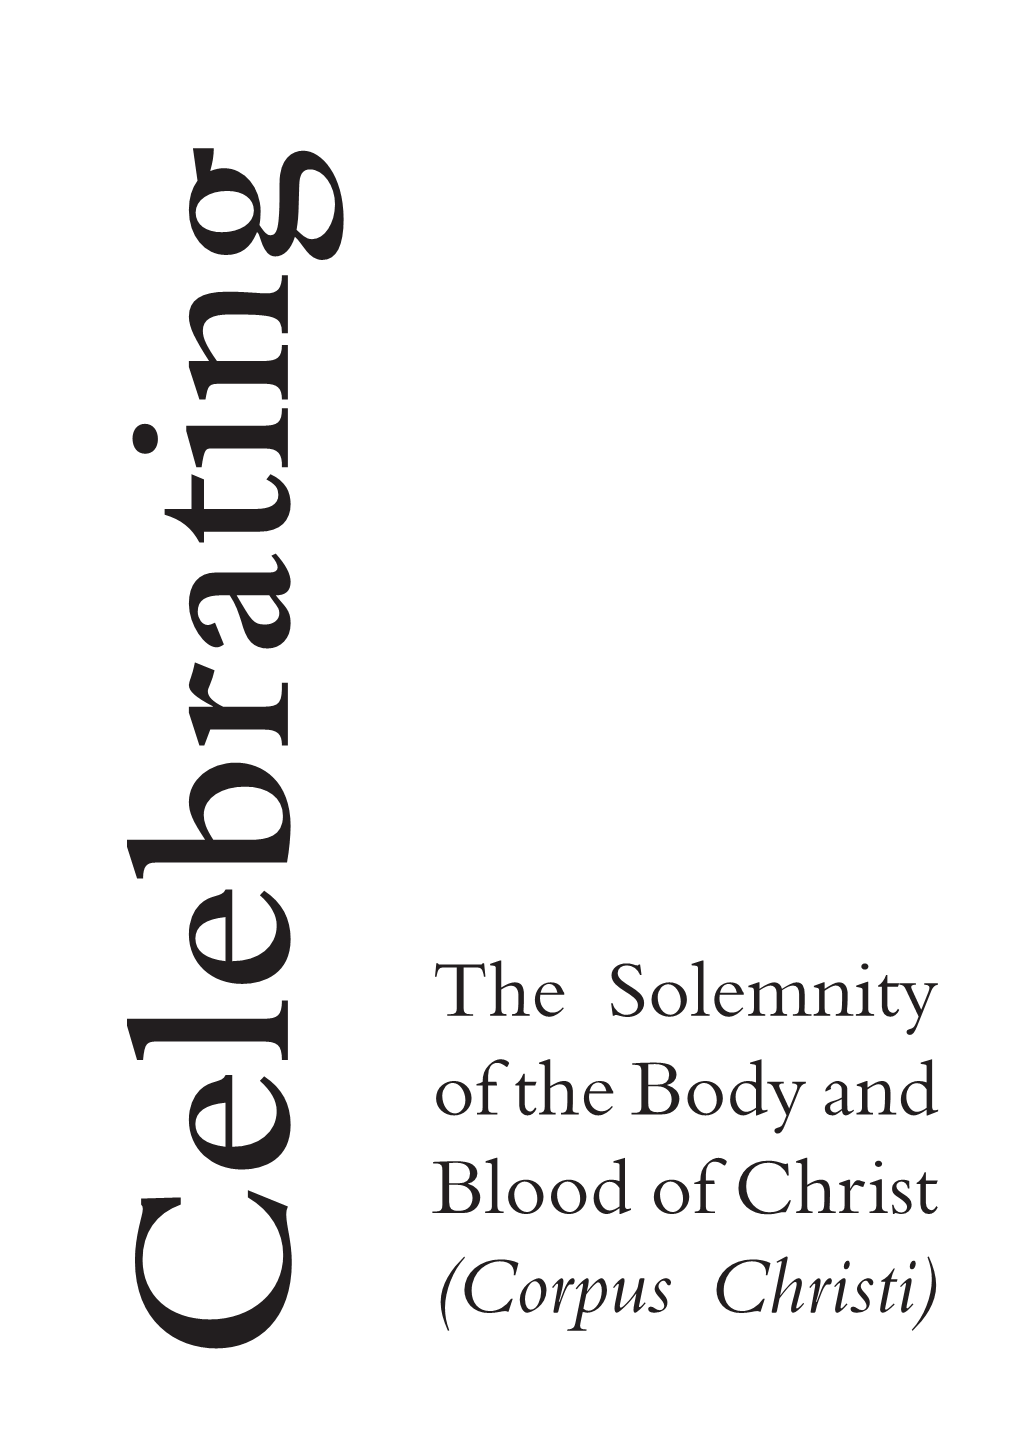 The Solemnity of the Body and Blood of Christ (Corpus Christi)